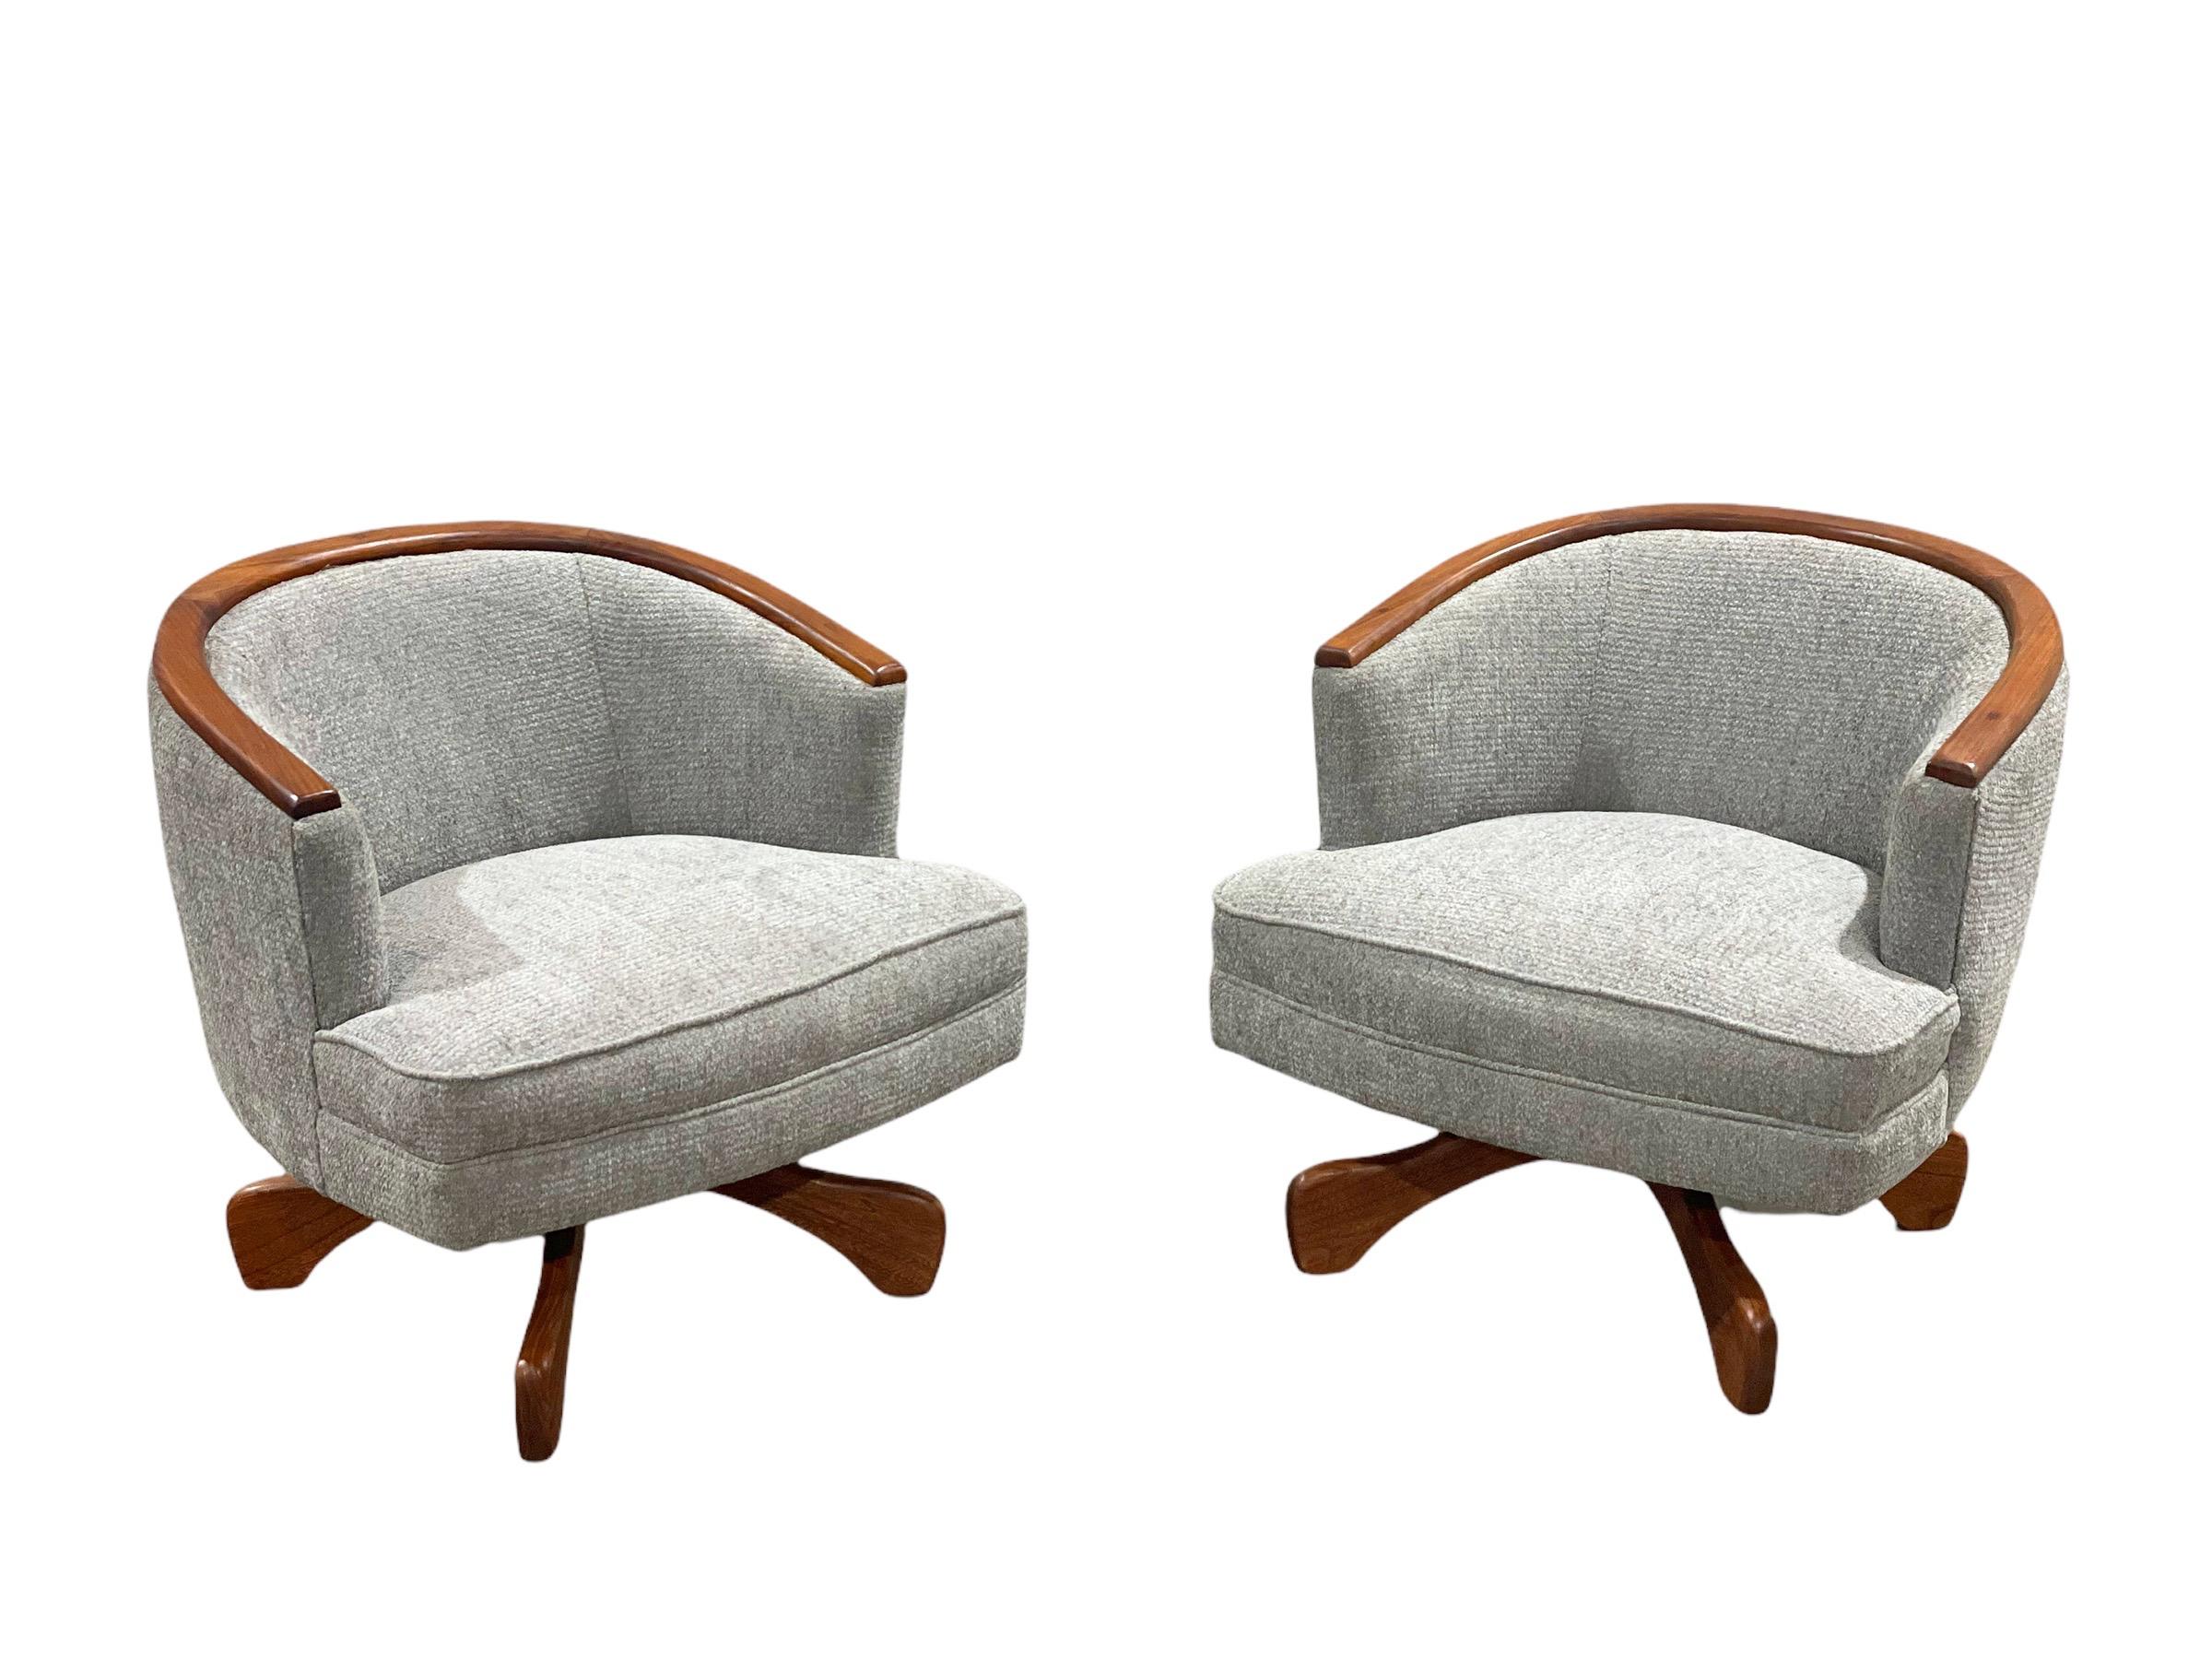 Pair of Mid-Century Modern swivel club barrel chairs after Adrian Pearsall. Unique and refined design with a skosh of fun flair. Completely restored by our team of in-house artisans. Solid walnut paddle bases and arm detail have been fully